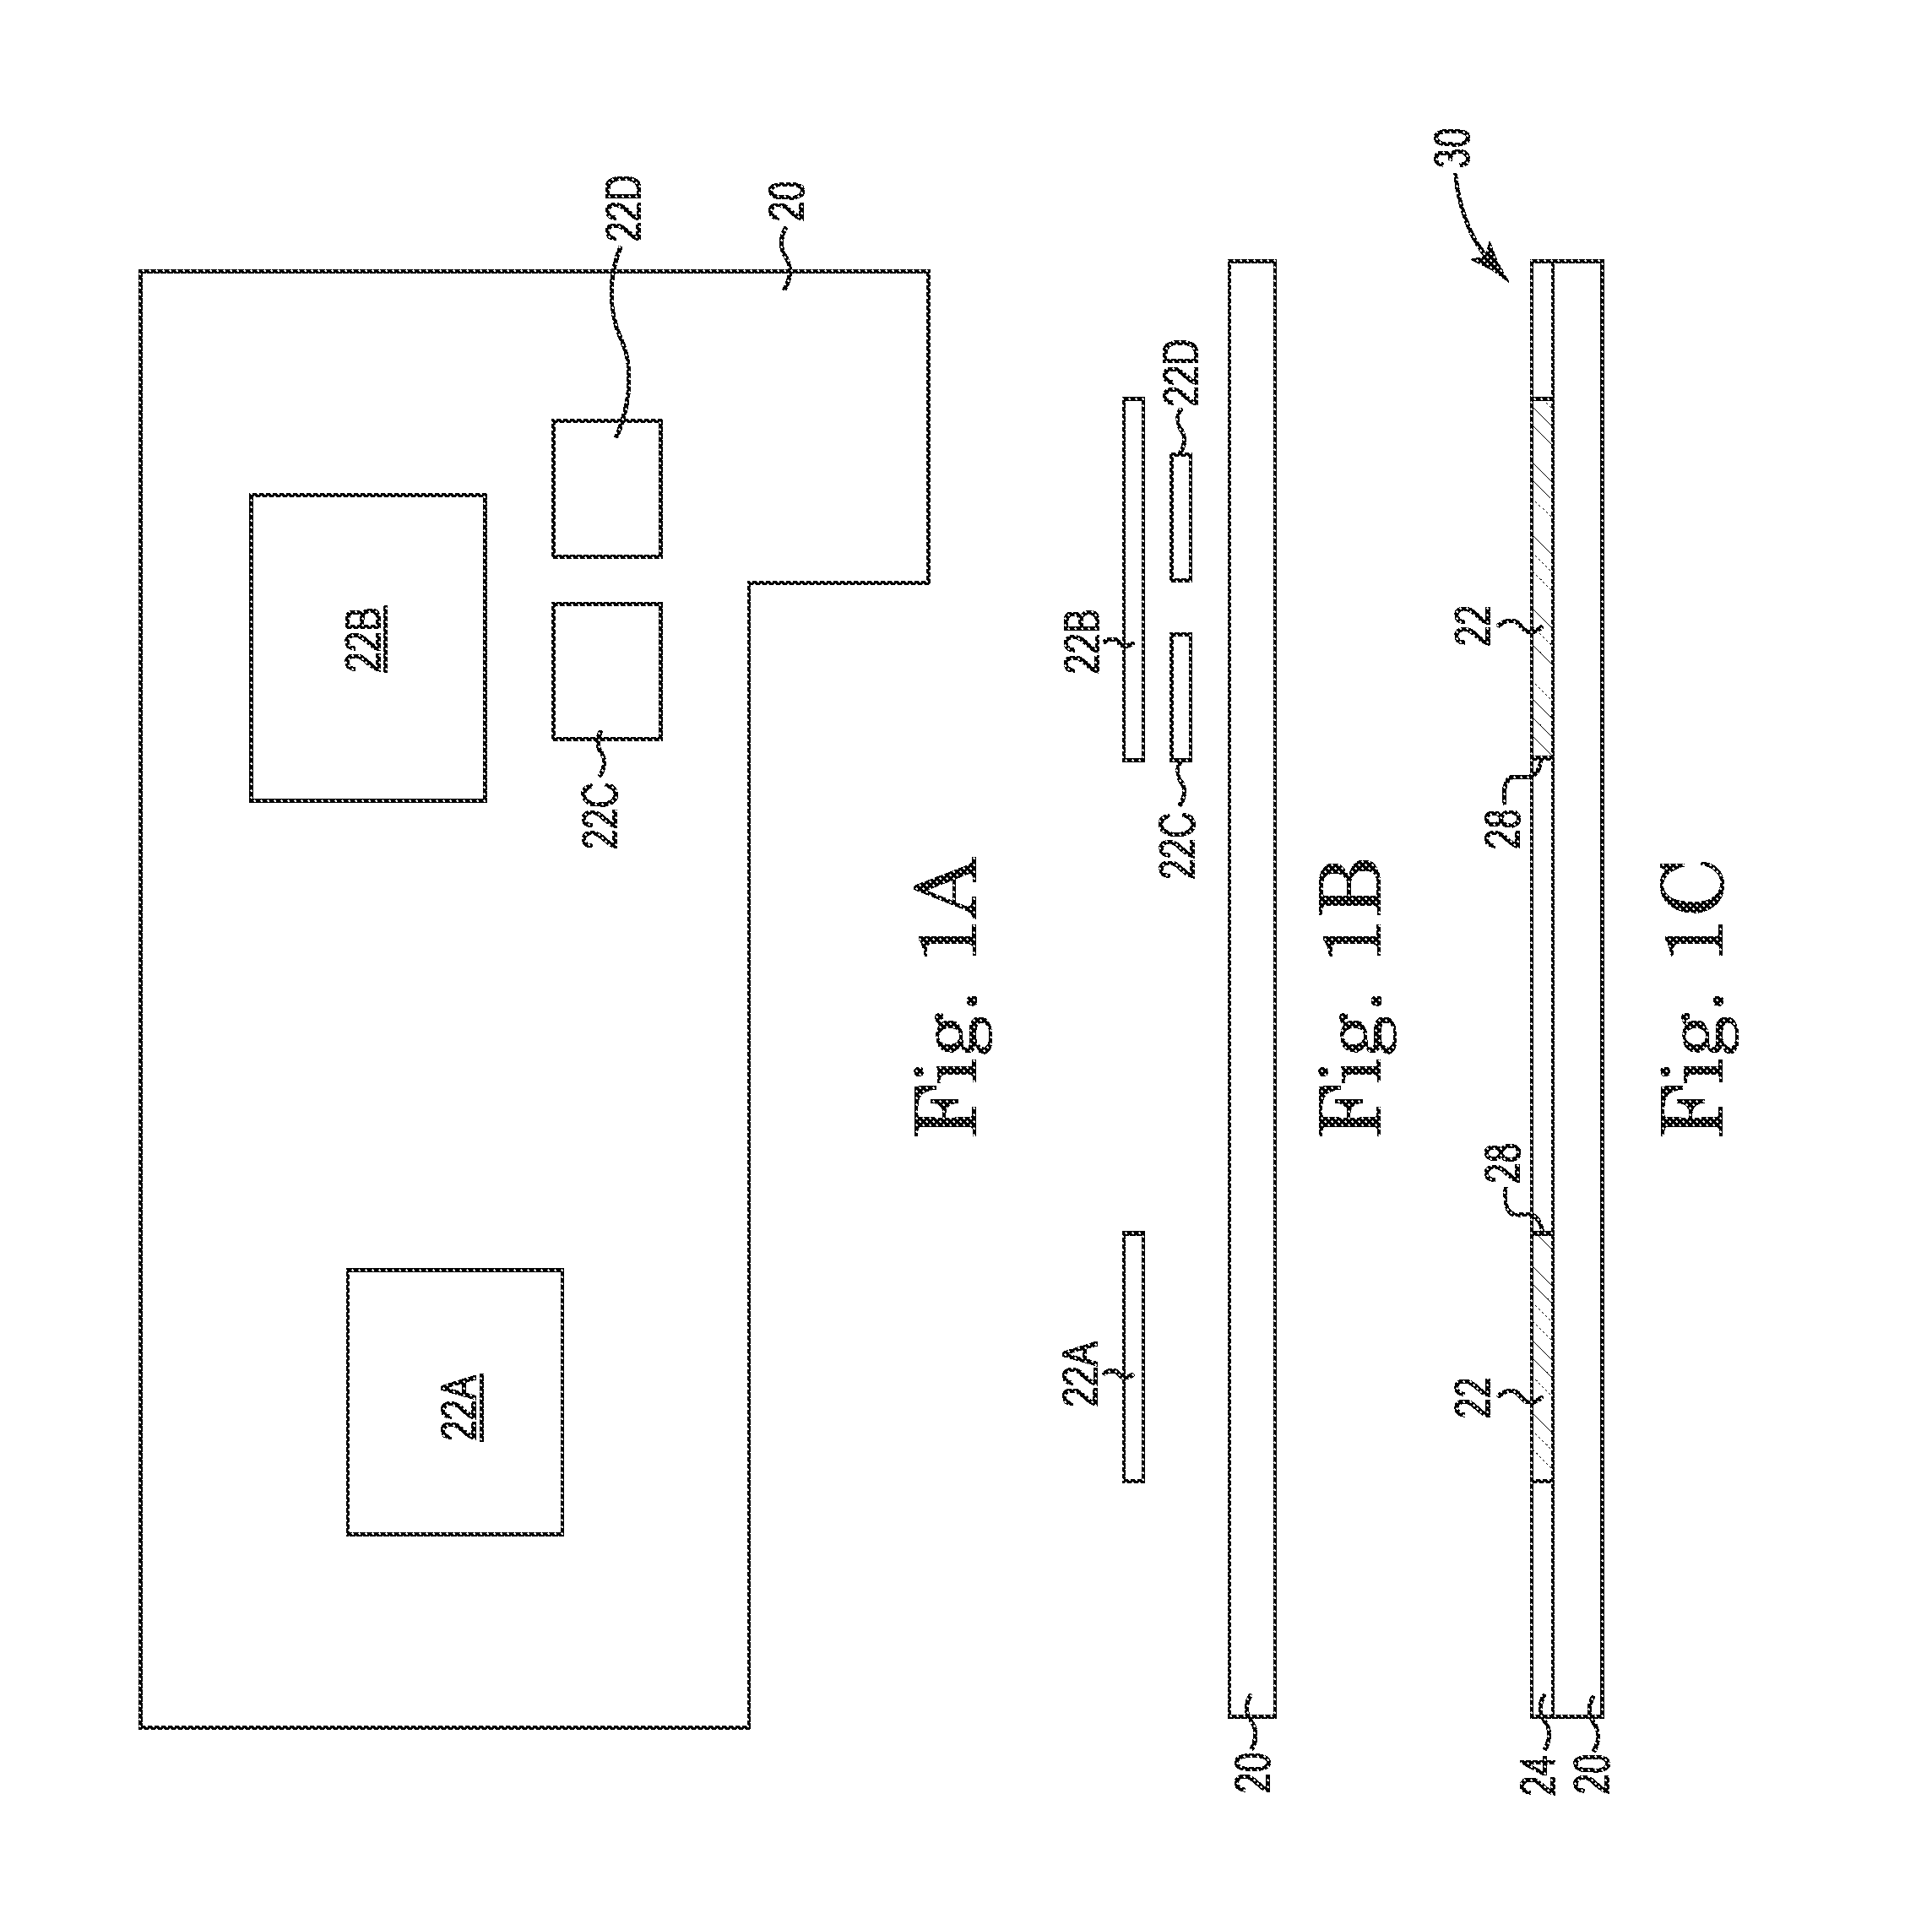 Hybrid printed circuit assembly with low density main core and embedded high density circuit regions